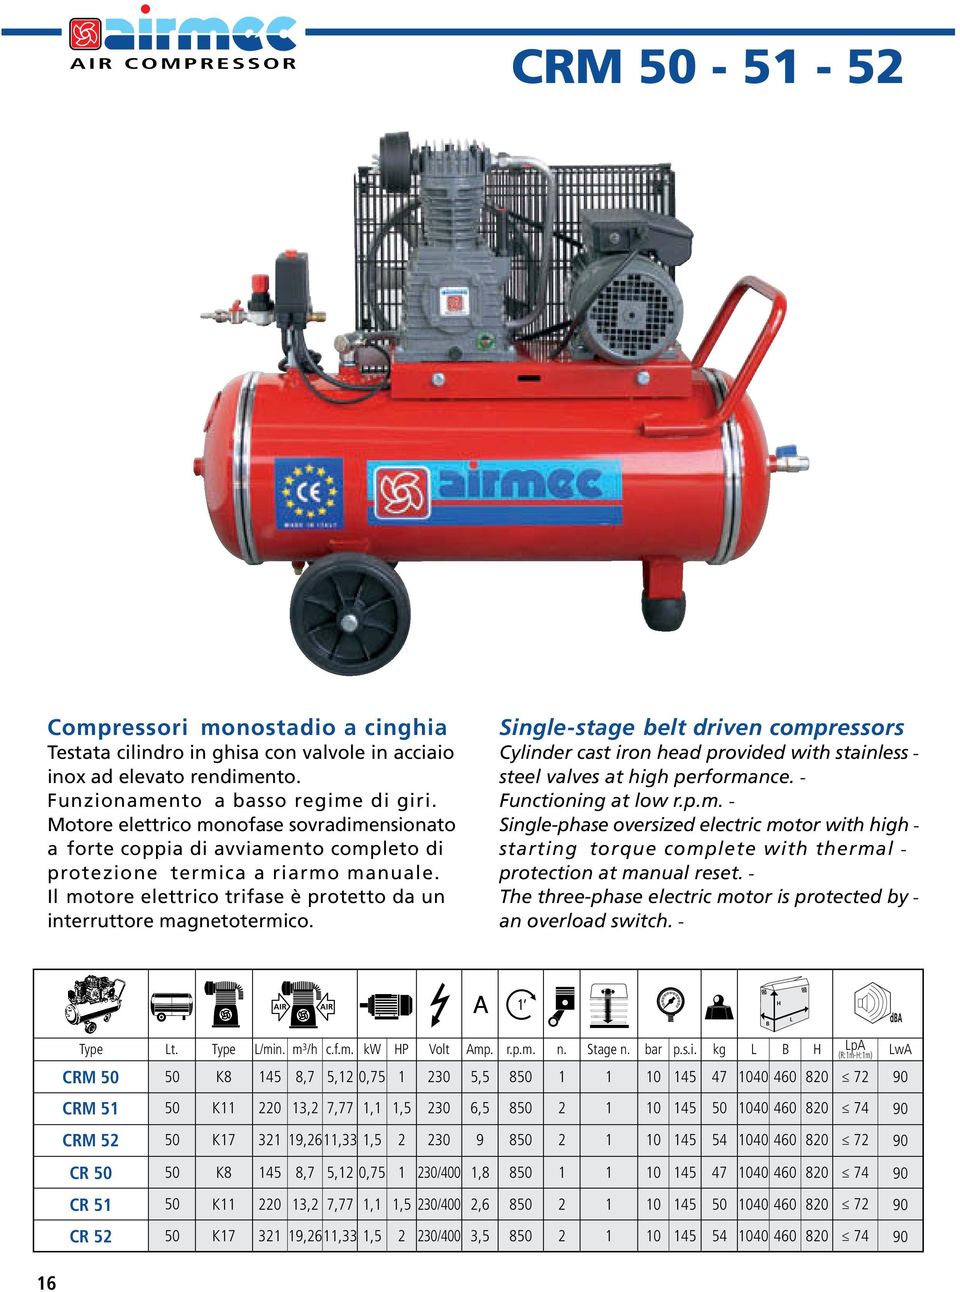 AIR AIR 1 da Single-stage belt driven compressors Cylinder cast iron head provided with stainlesssteel valves at high performance. Functioning at low r.p.m. Single-phase oversized electric motor with highstarting torque complete with thermalprotection at manual reset.